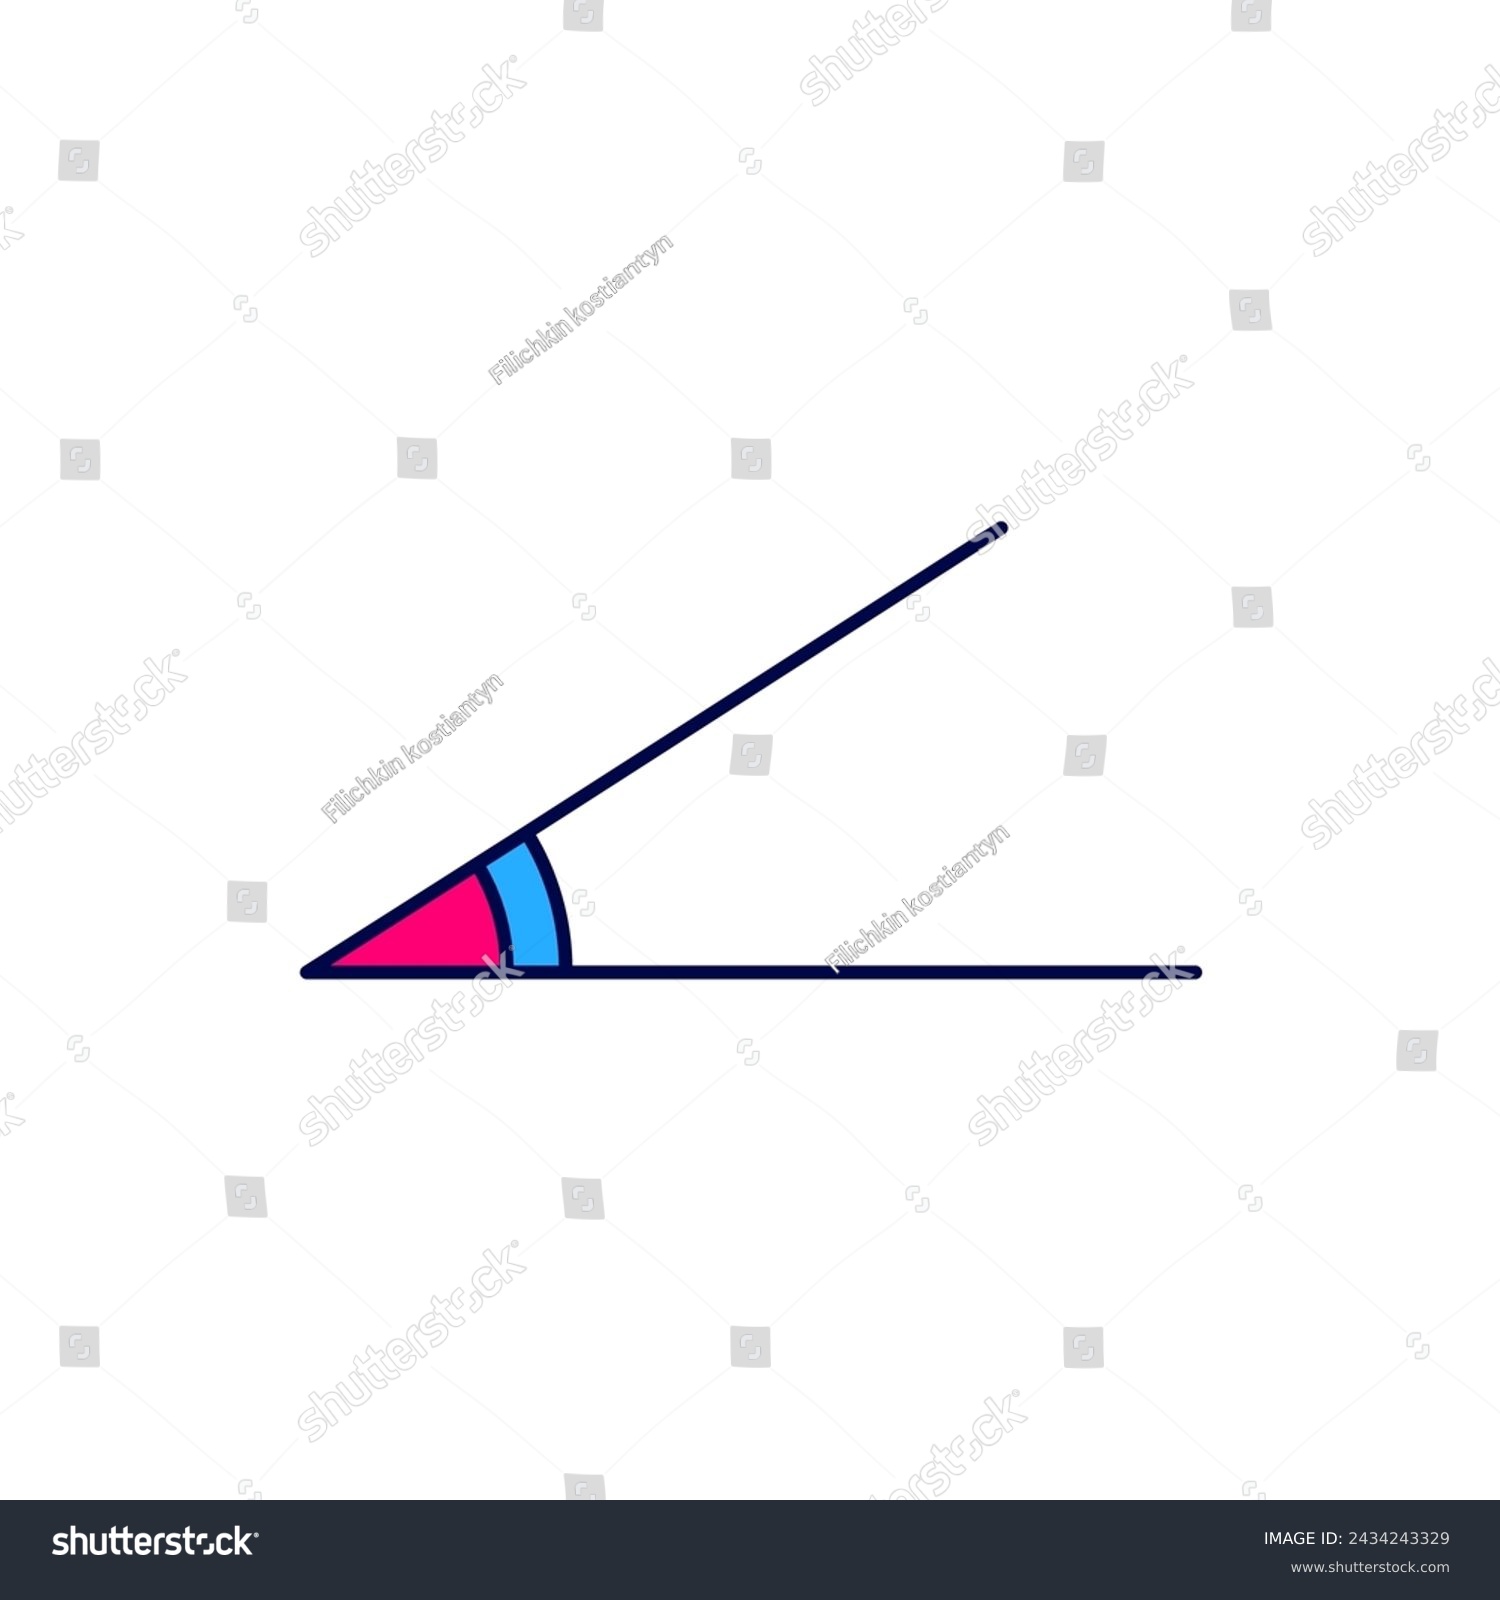 SVG of Filled outline Acute angle of 45 degrees icon isolated on white background.  Vector svg